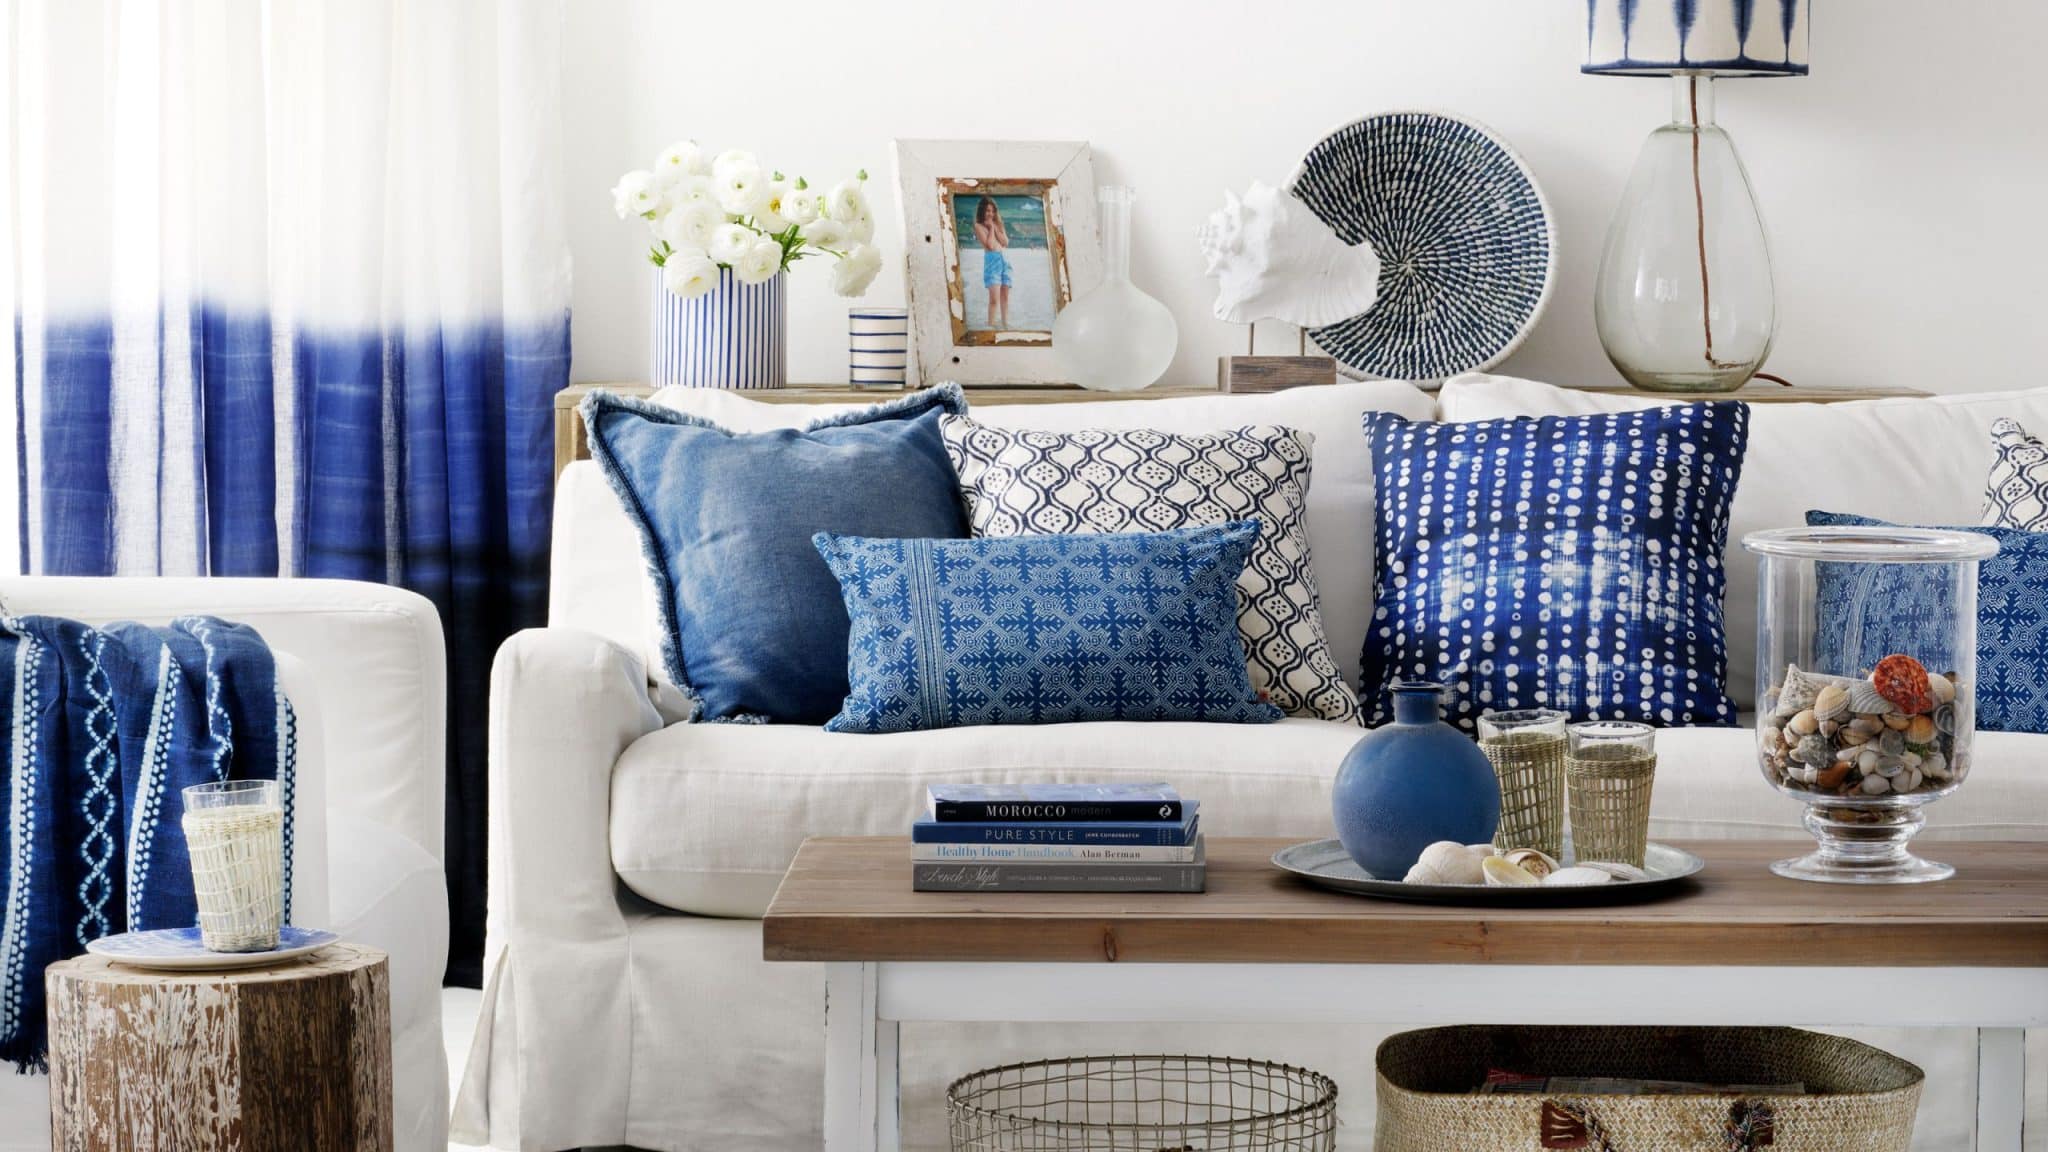 How to Style and Accessorize a Sofa for Coastal Inspired Living Room?